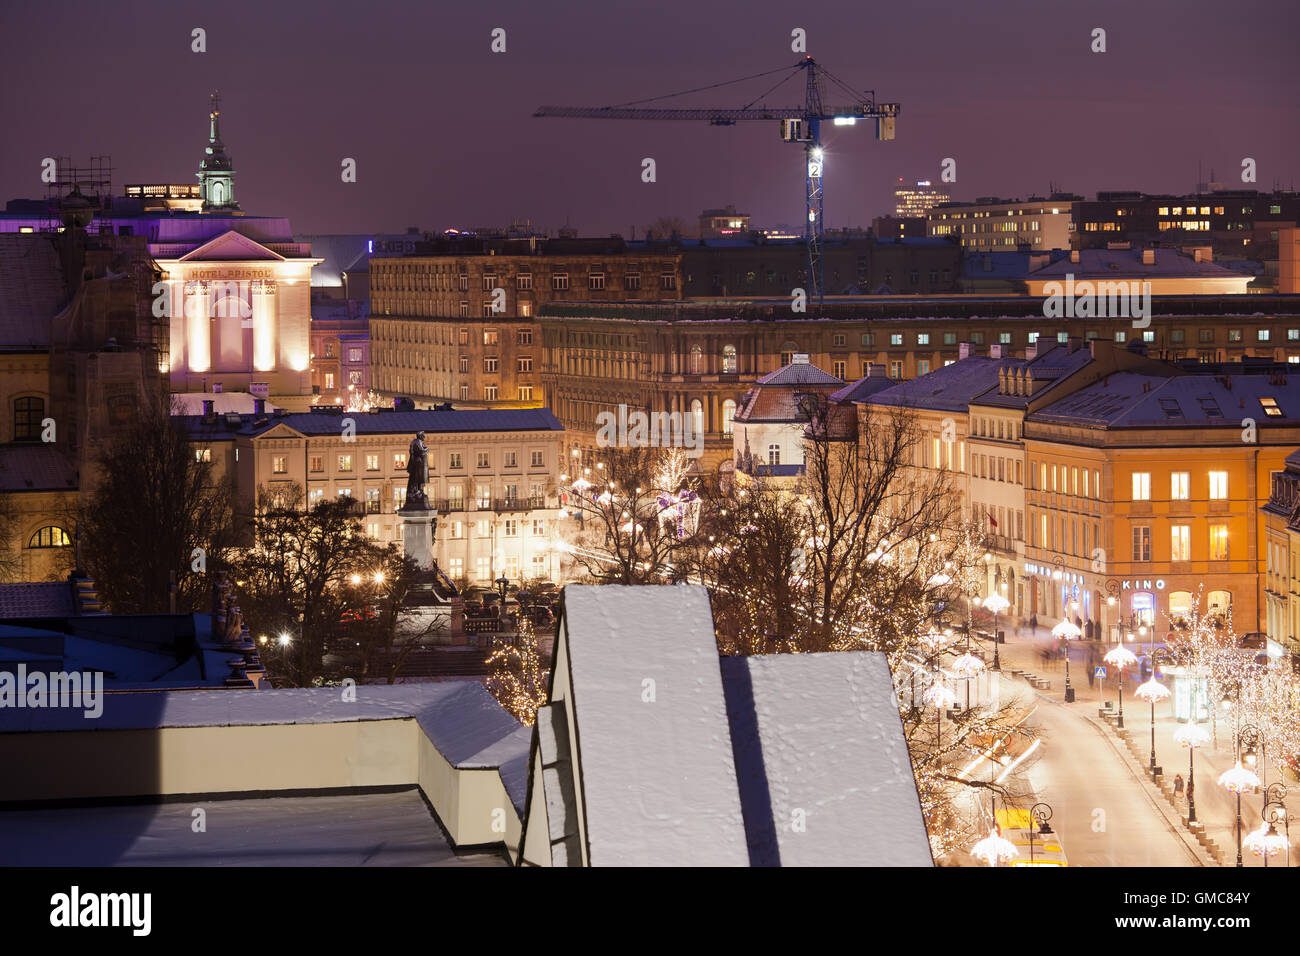 Capital city of Warsaw at night in Poland, buildings along Krakowskie Pzredmiescie street, Royal Route Stock Photo